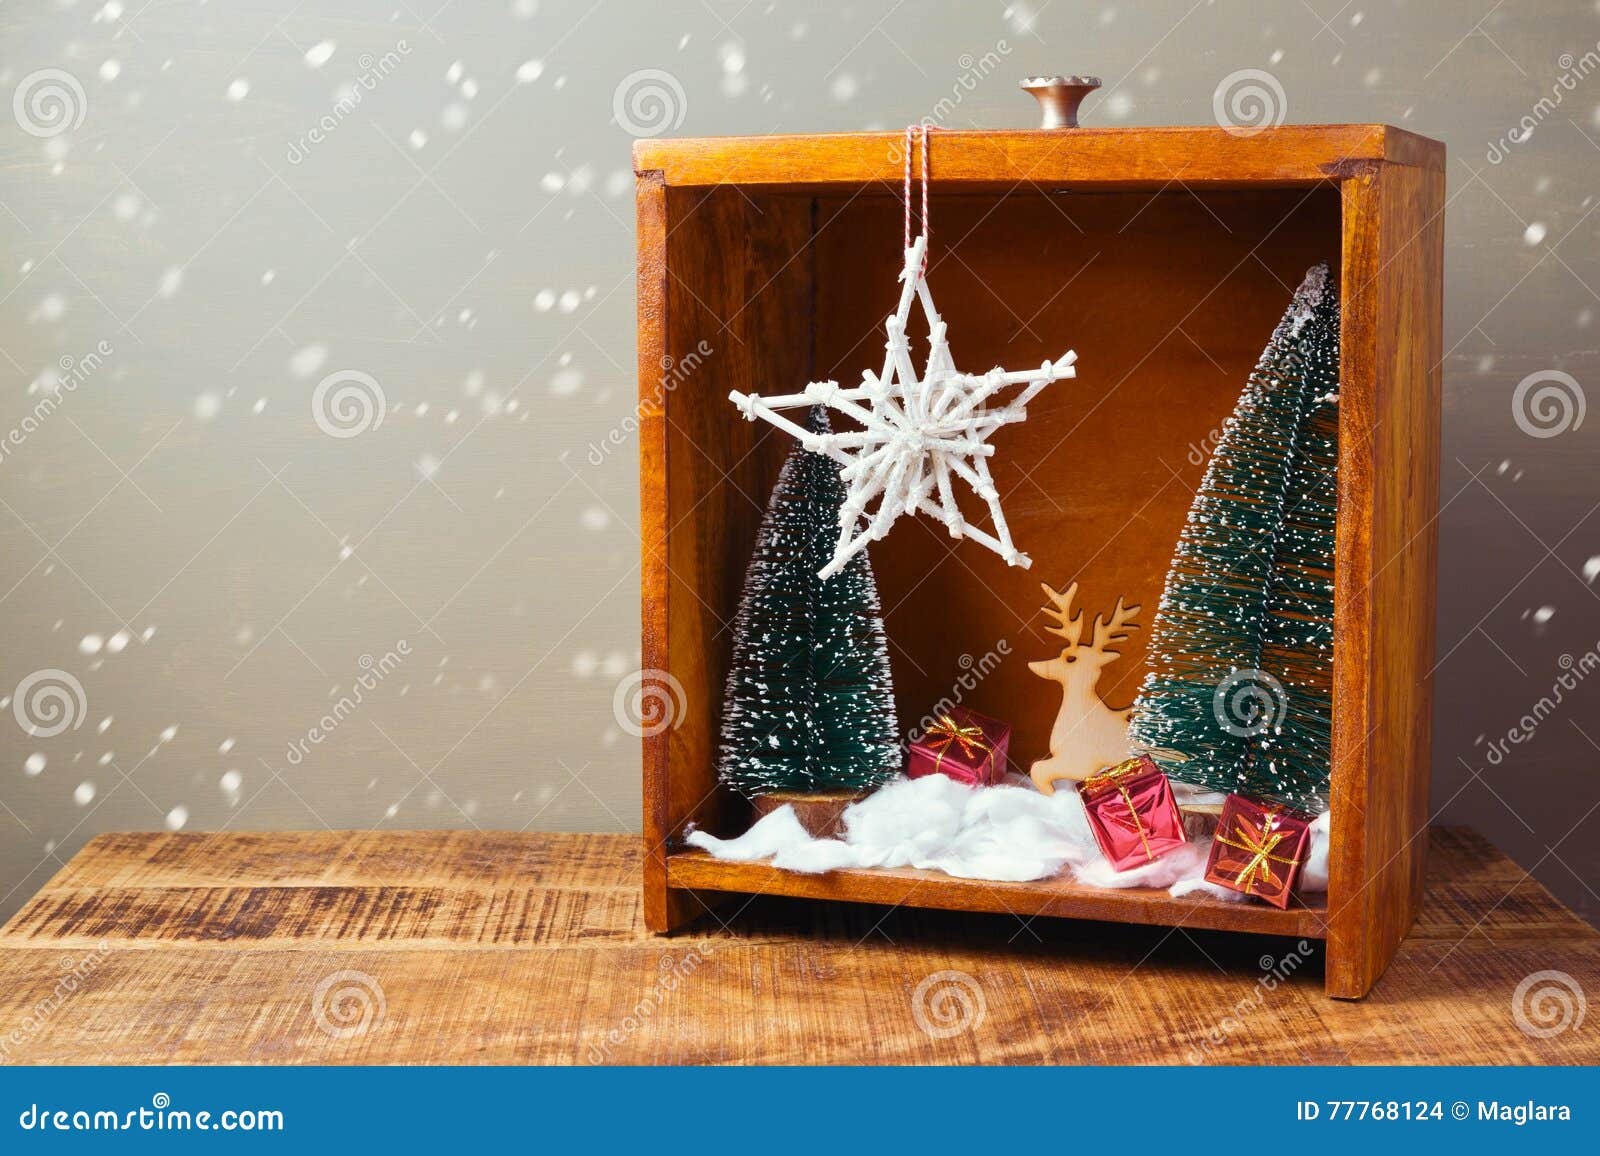 christmas diorama with pine trees and decorations on wooden table